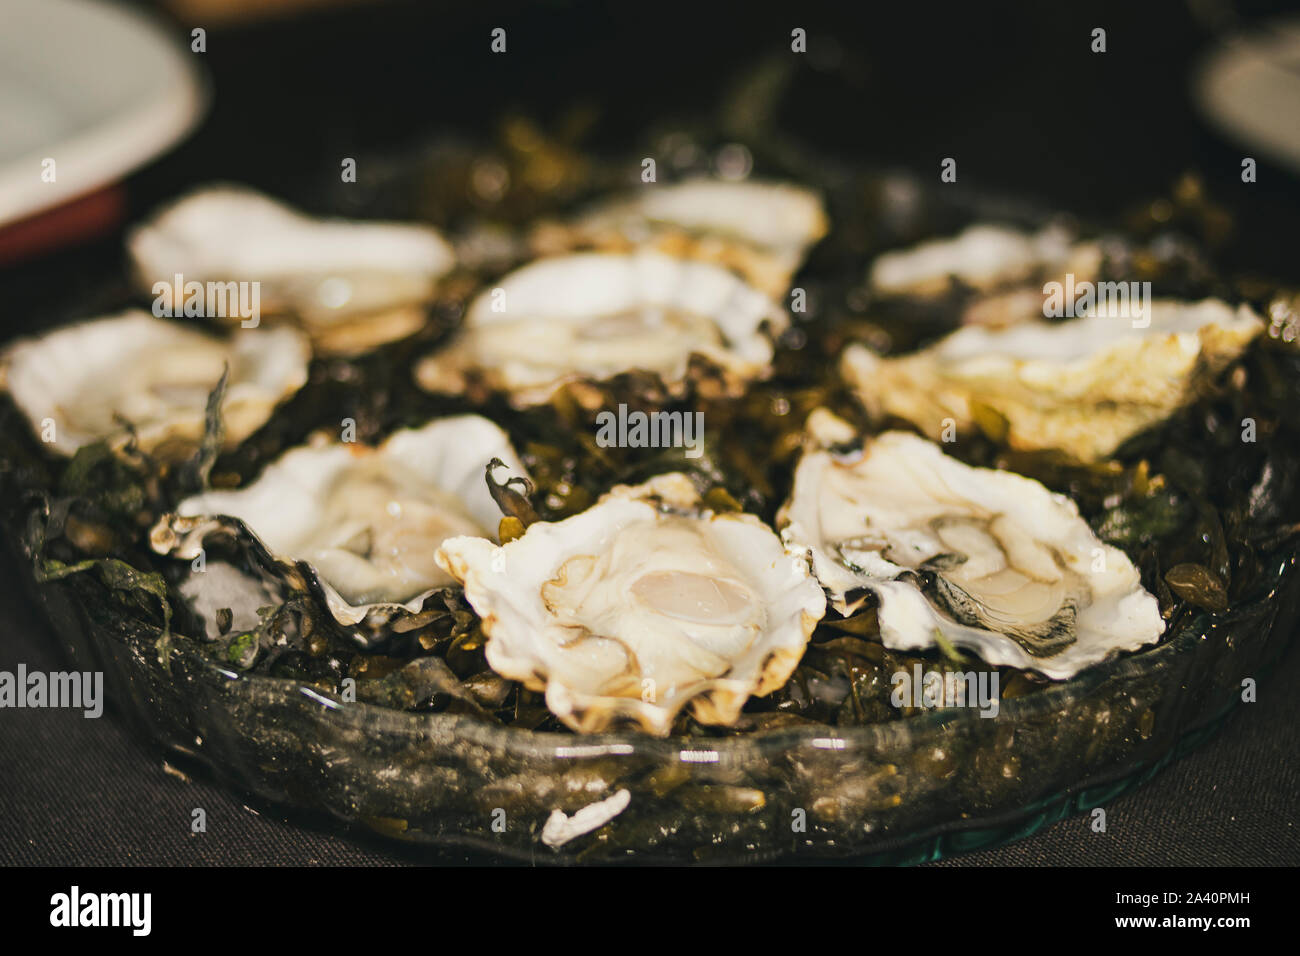 bowl of oysters ready to taste with natural lemon Stock Photo